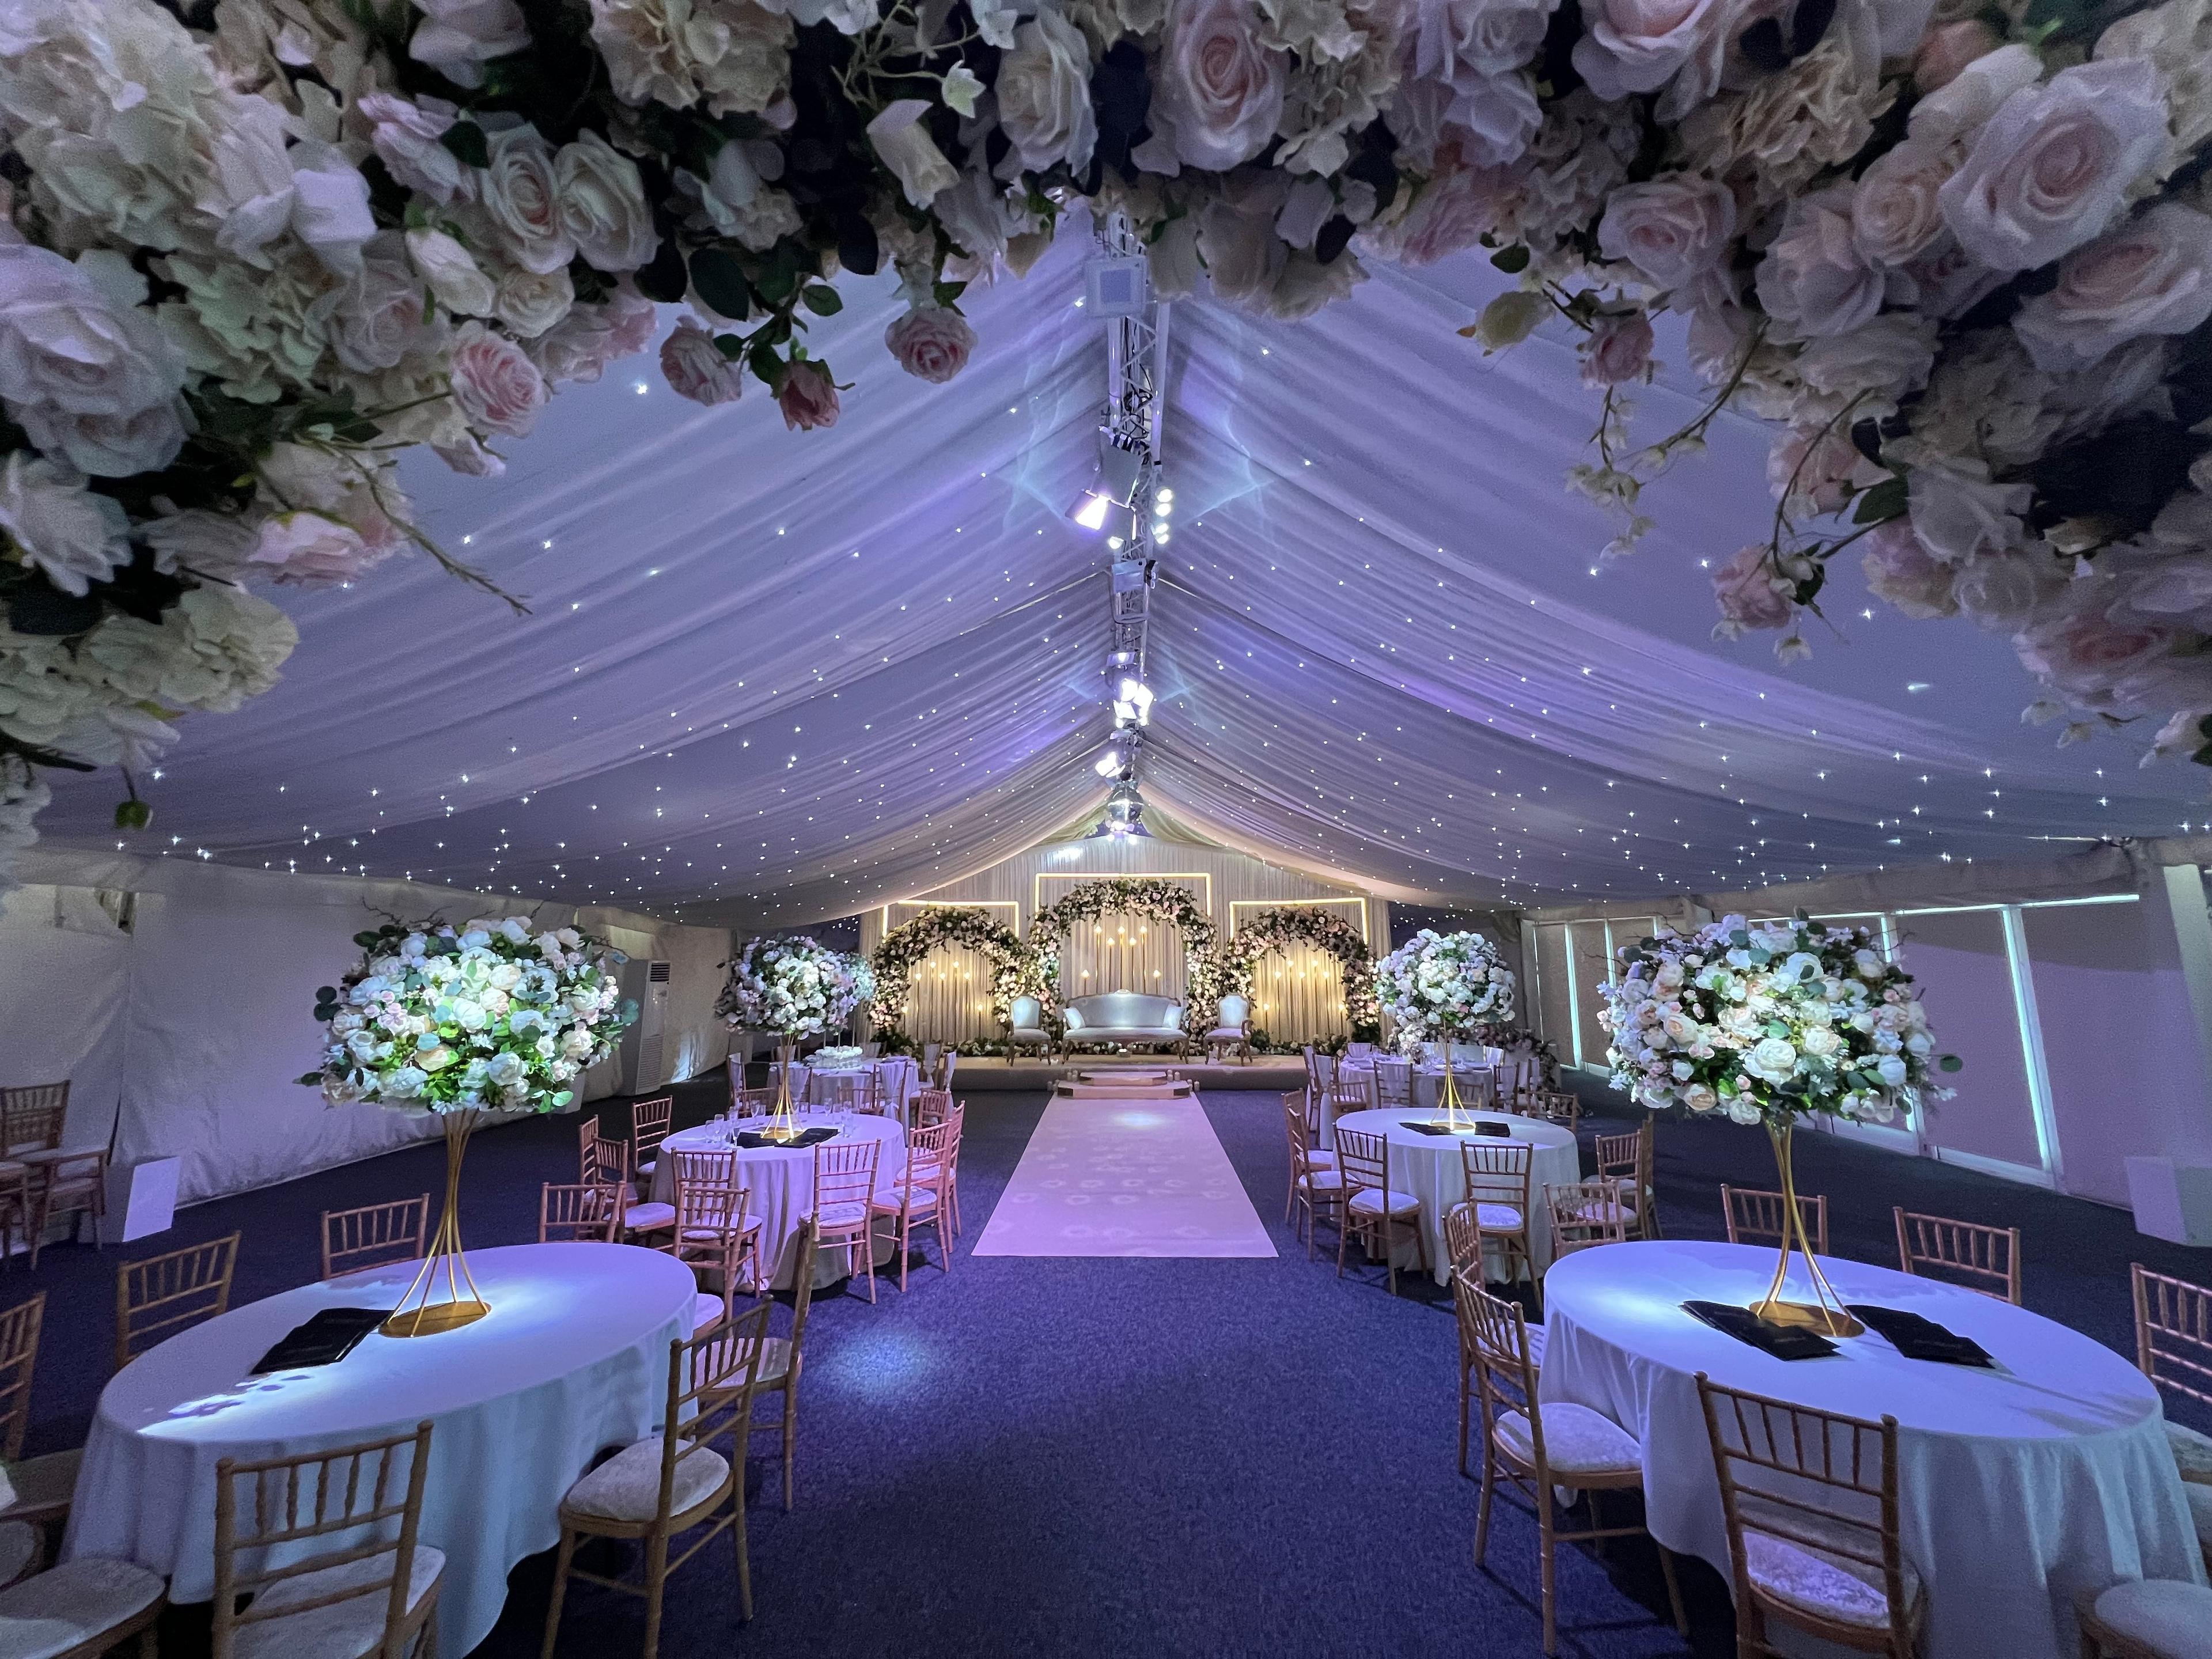 Exclusive Hire, The Conservatory At The Luton Hoo Walled Garden photo #2